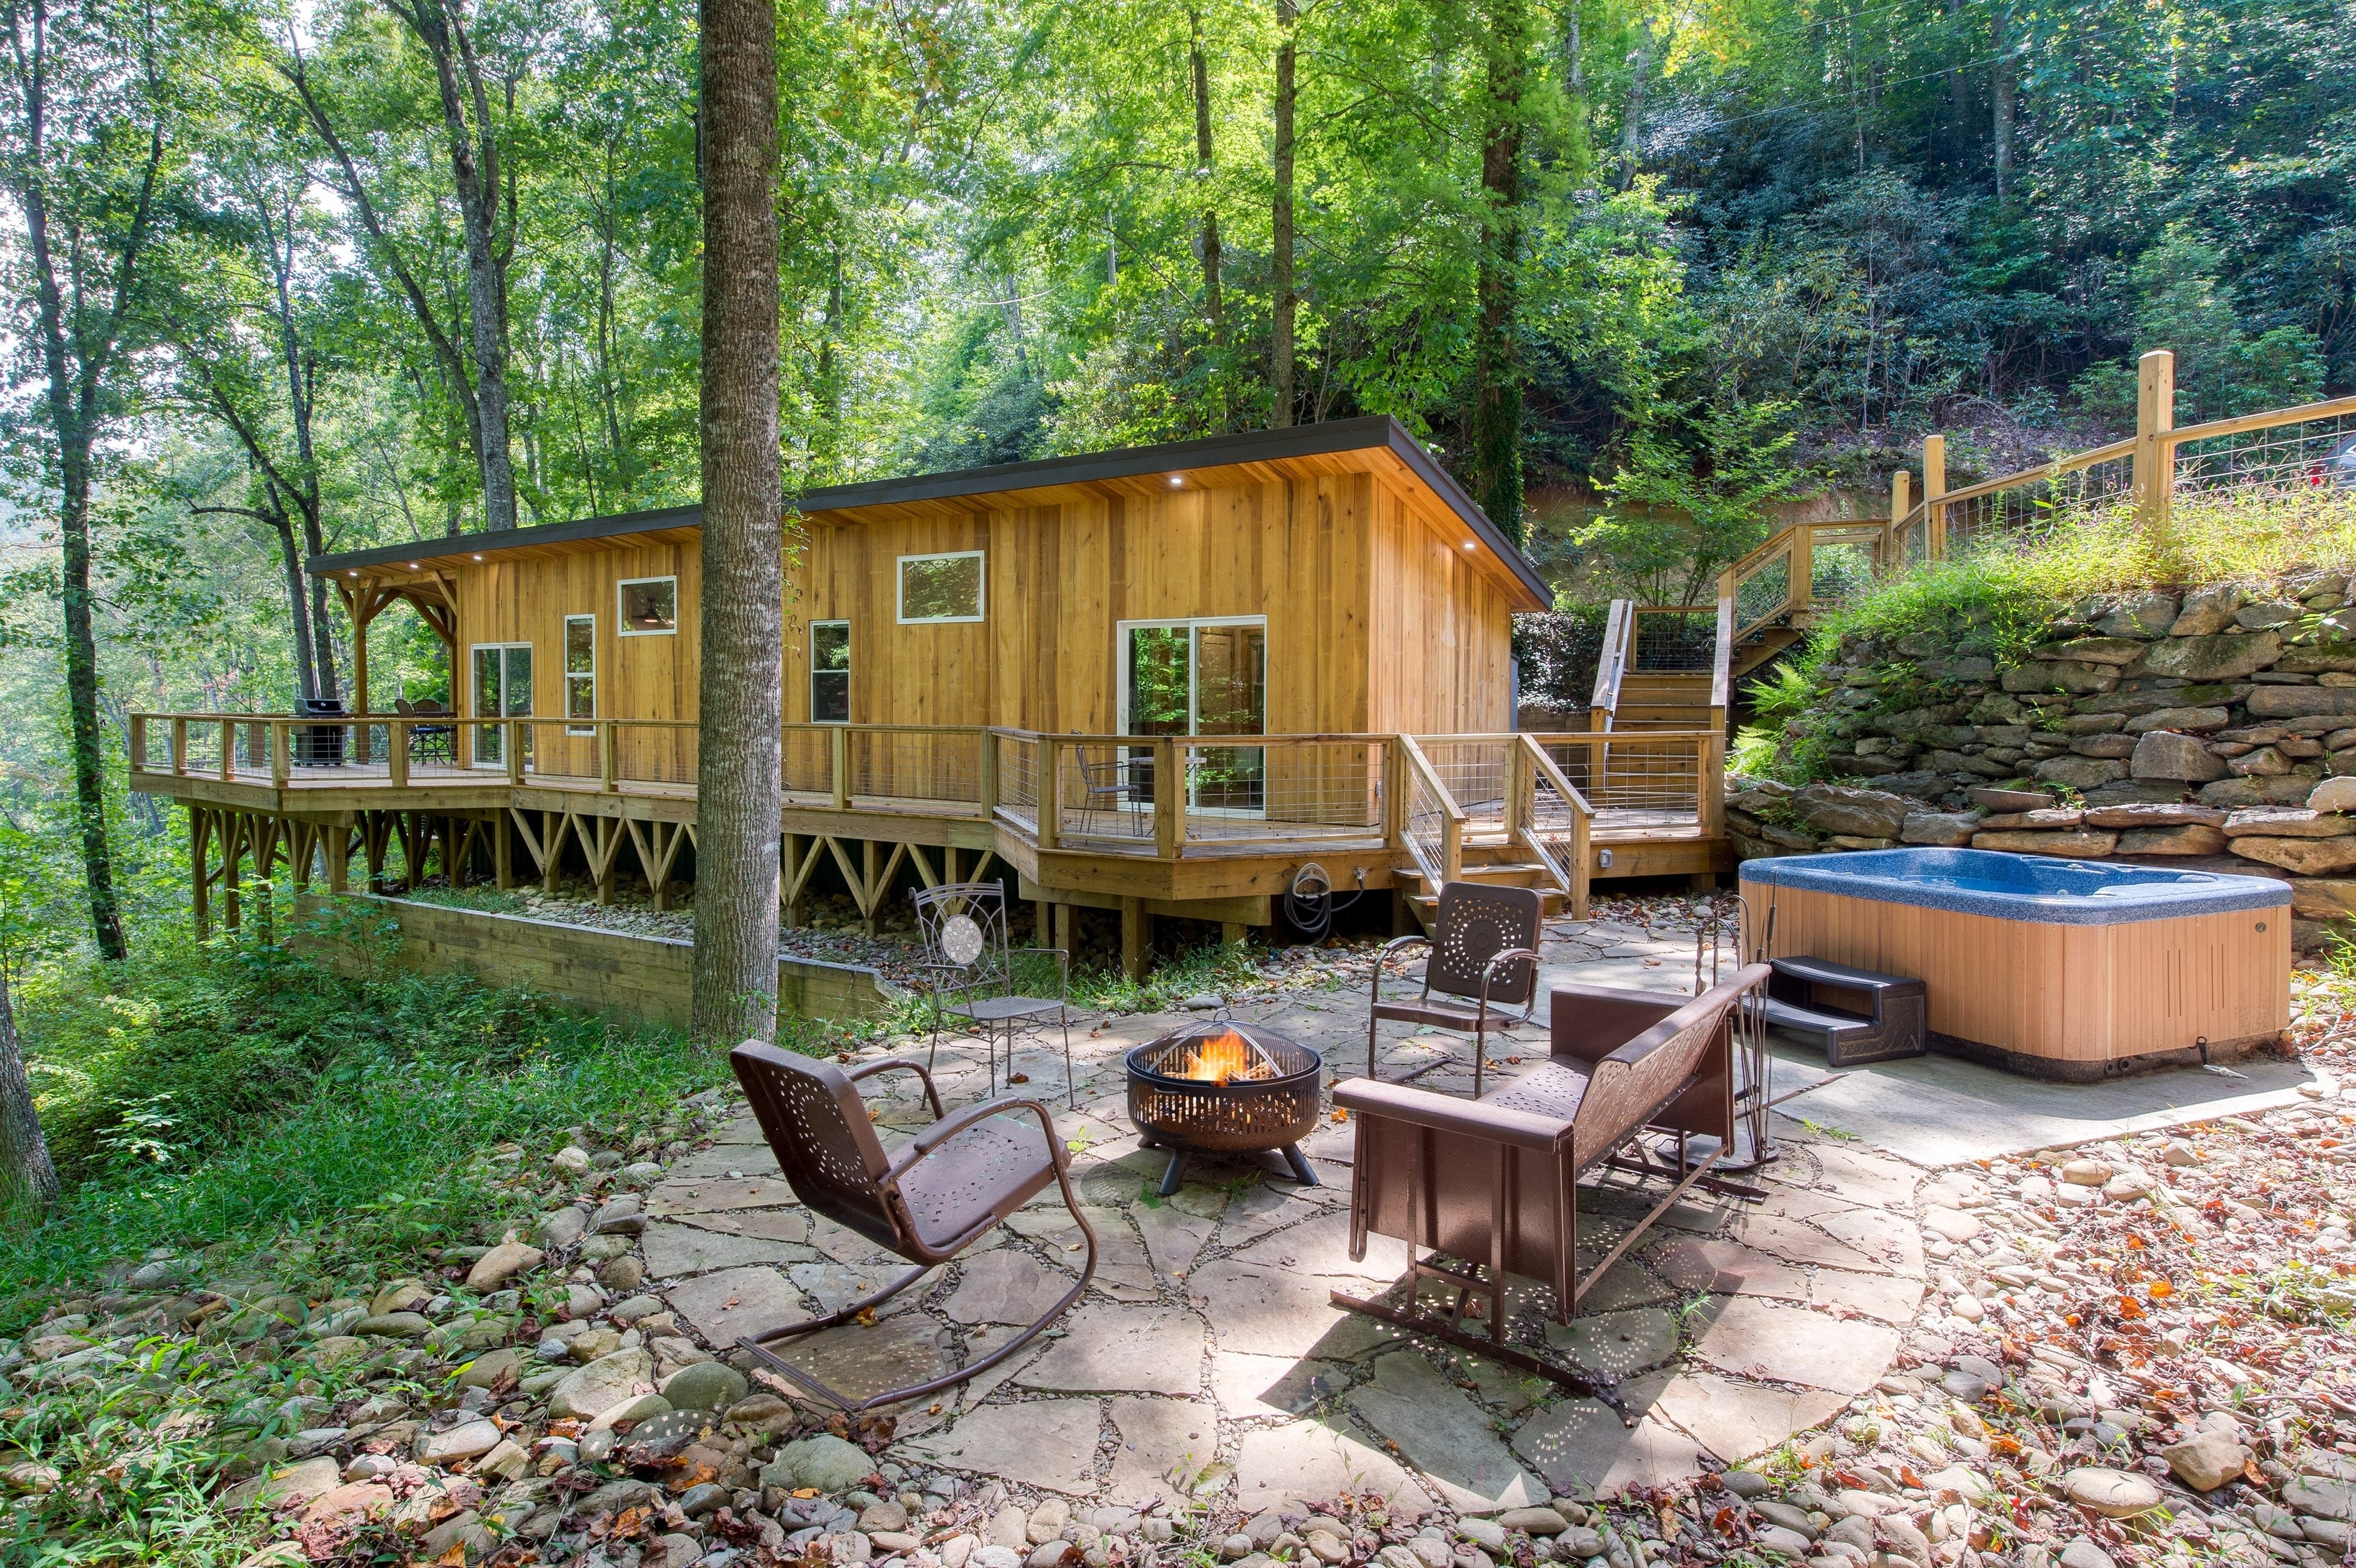 Stunning outdoor space is surrounded by trees and offers lounge areas and a hot tub.